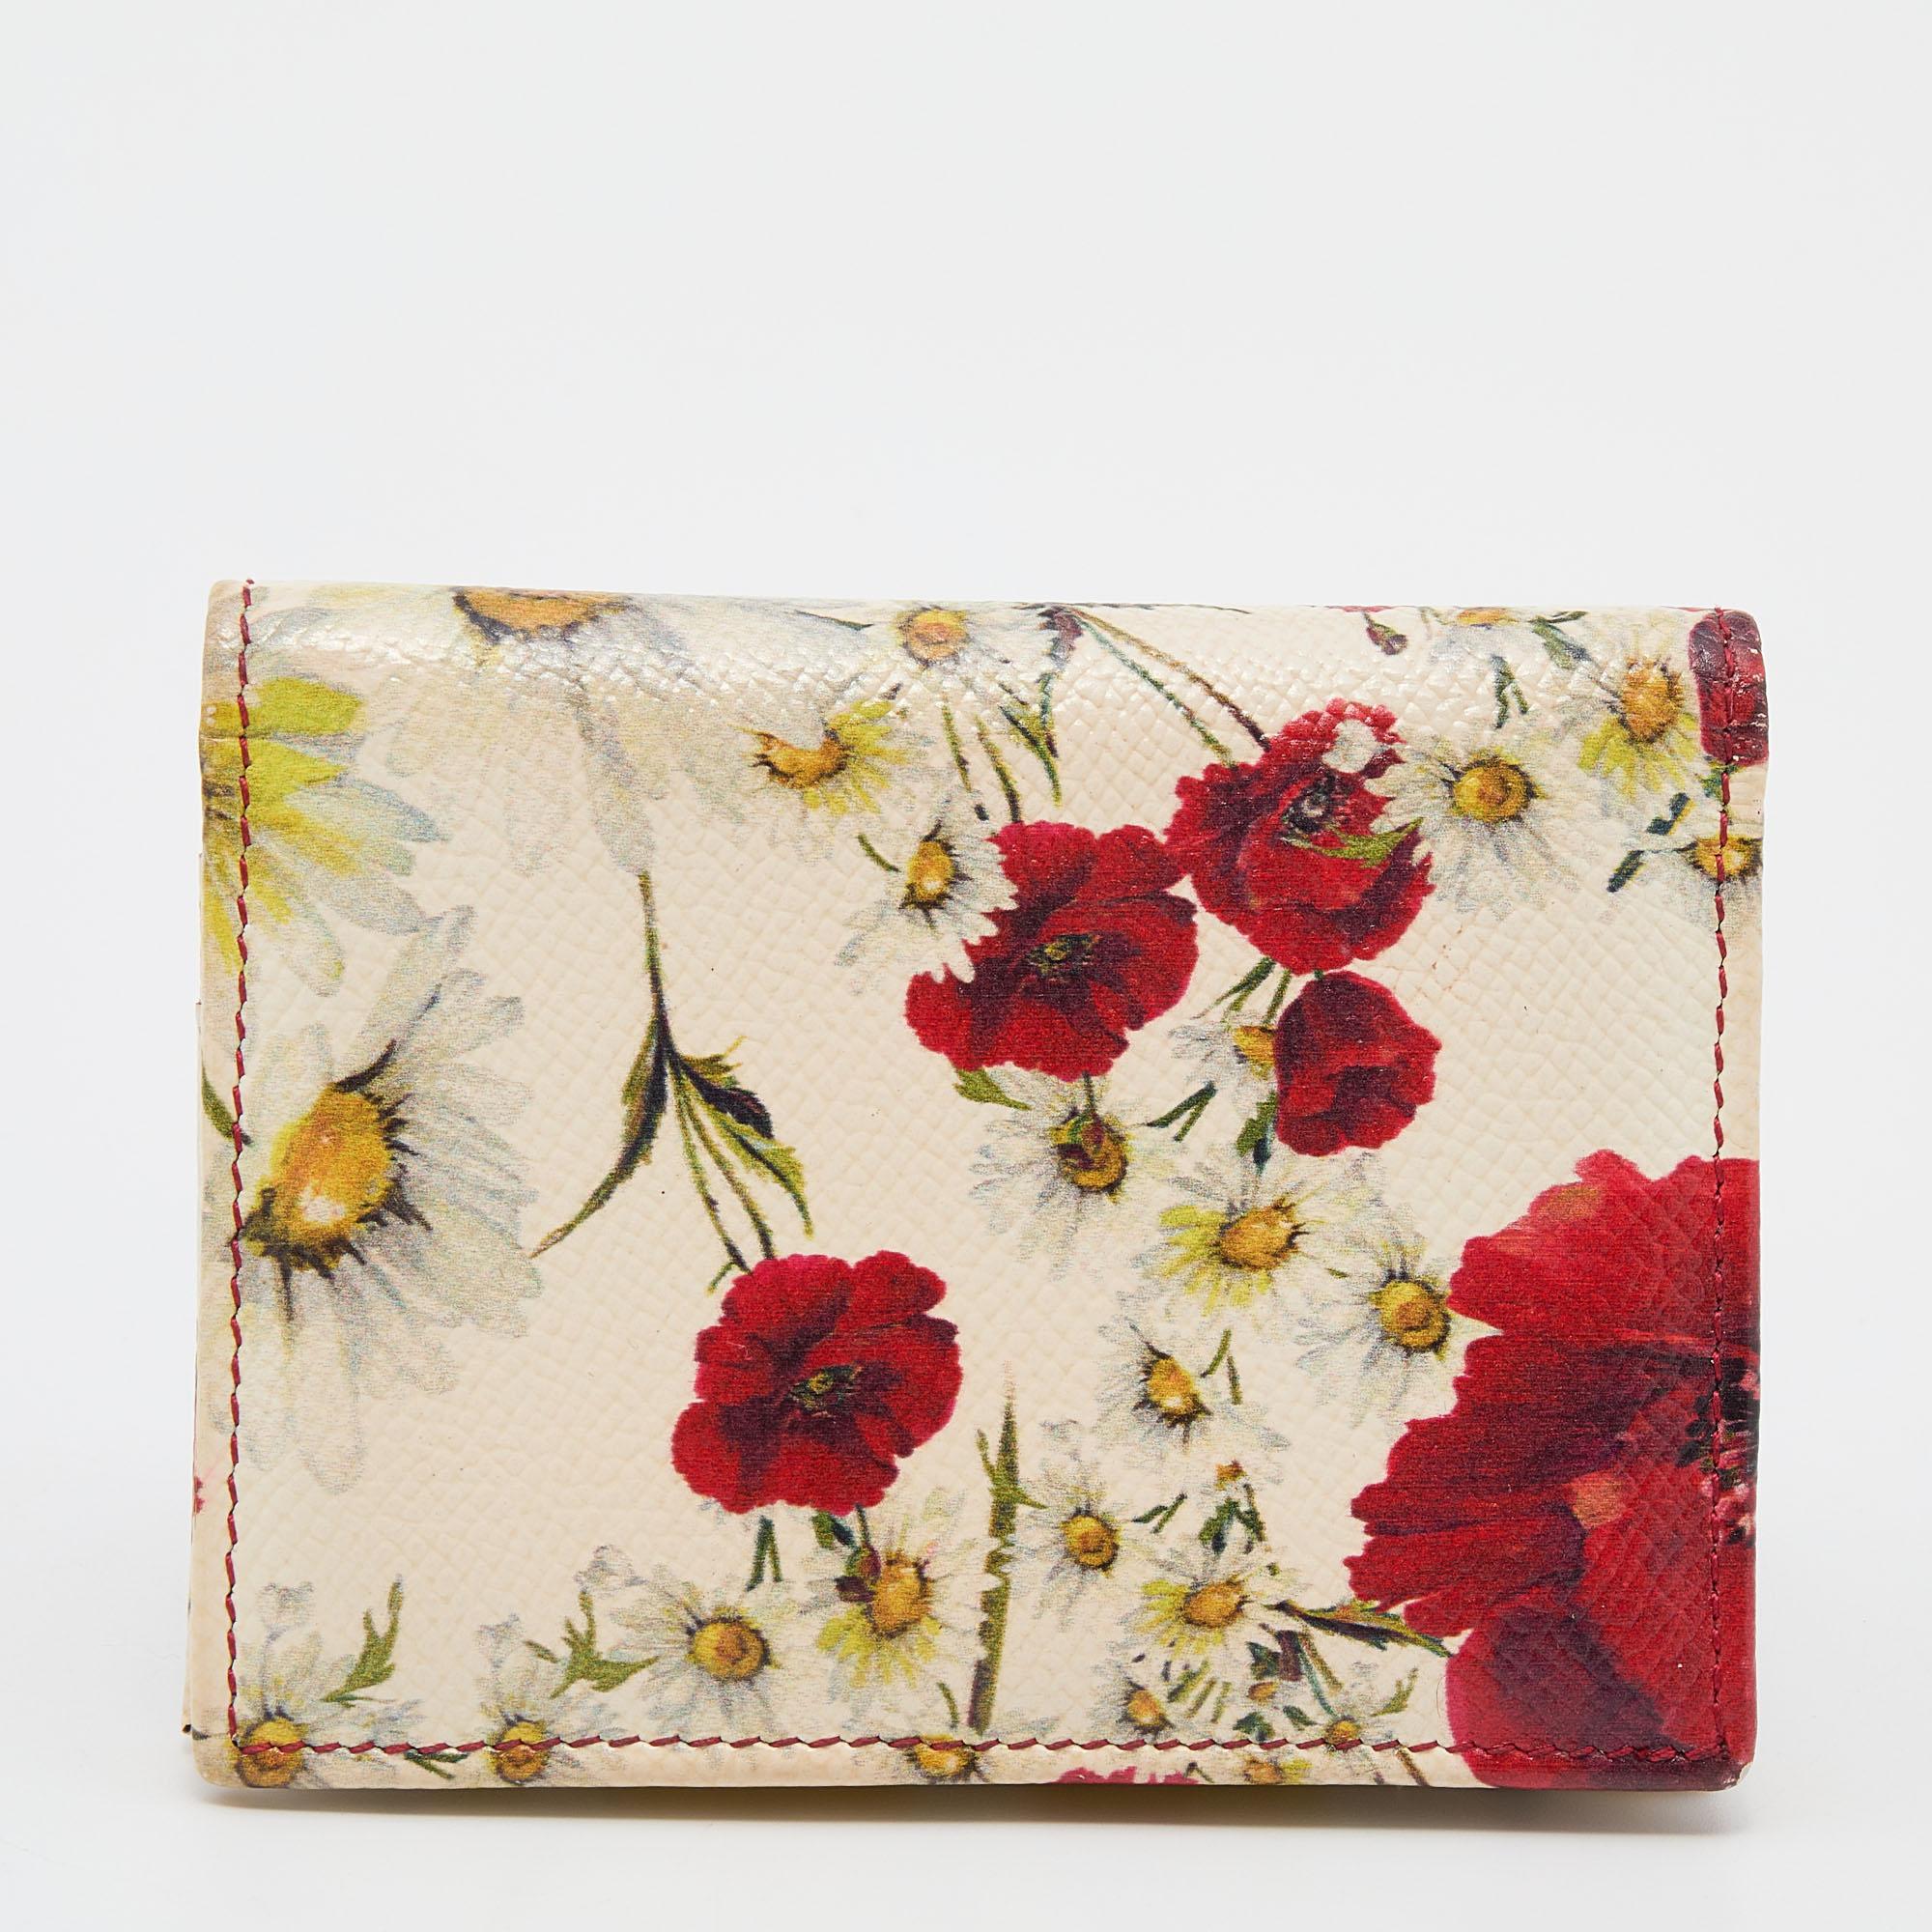 Meticulously crafted from high-end leather, this Dolce & Gabbana wallet exudes just the right amount of Sicilian allure that the label carries. The creation features a logo-accented front flap and a floral-printed exterior in vibrant hues. Carry